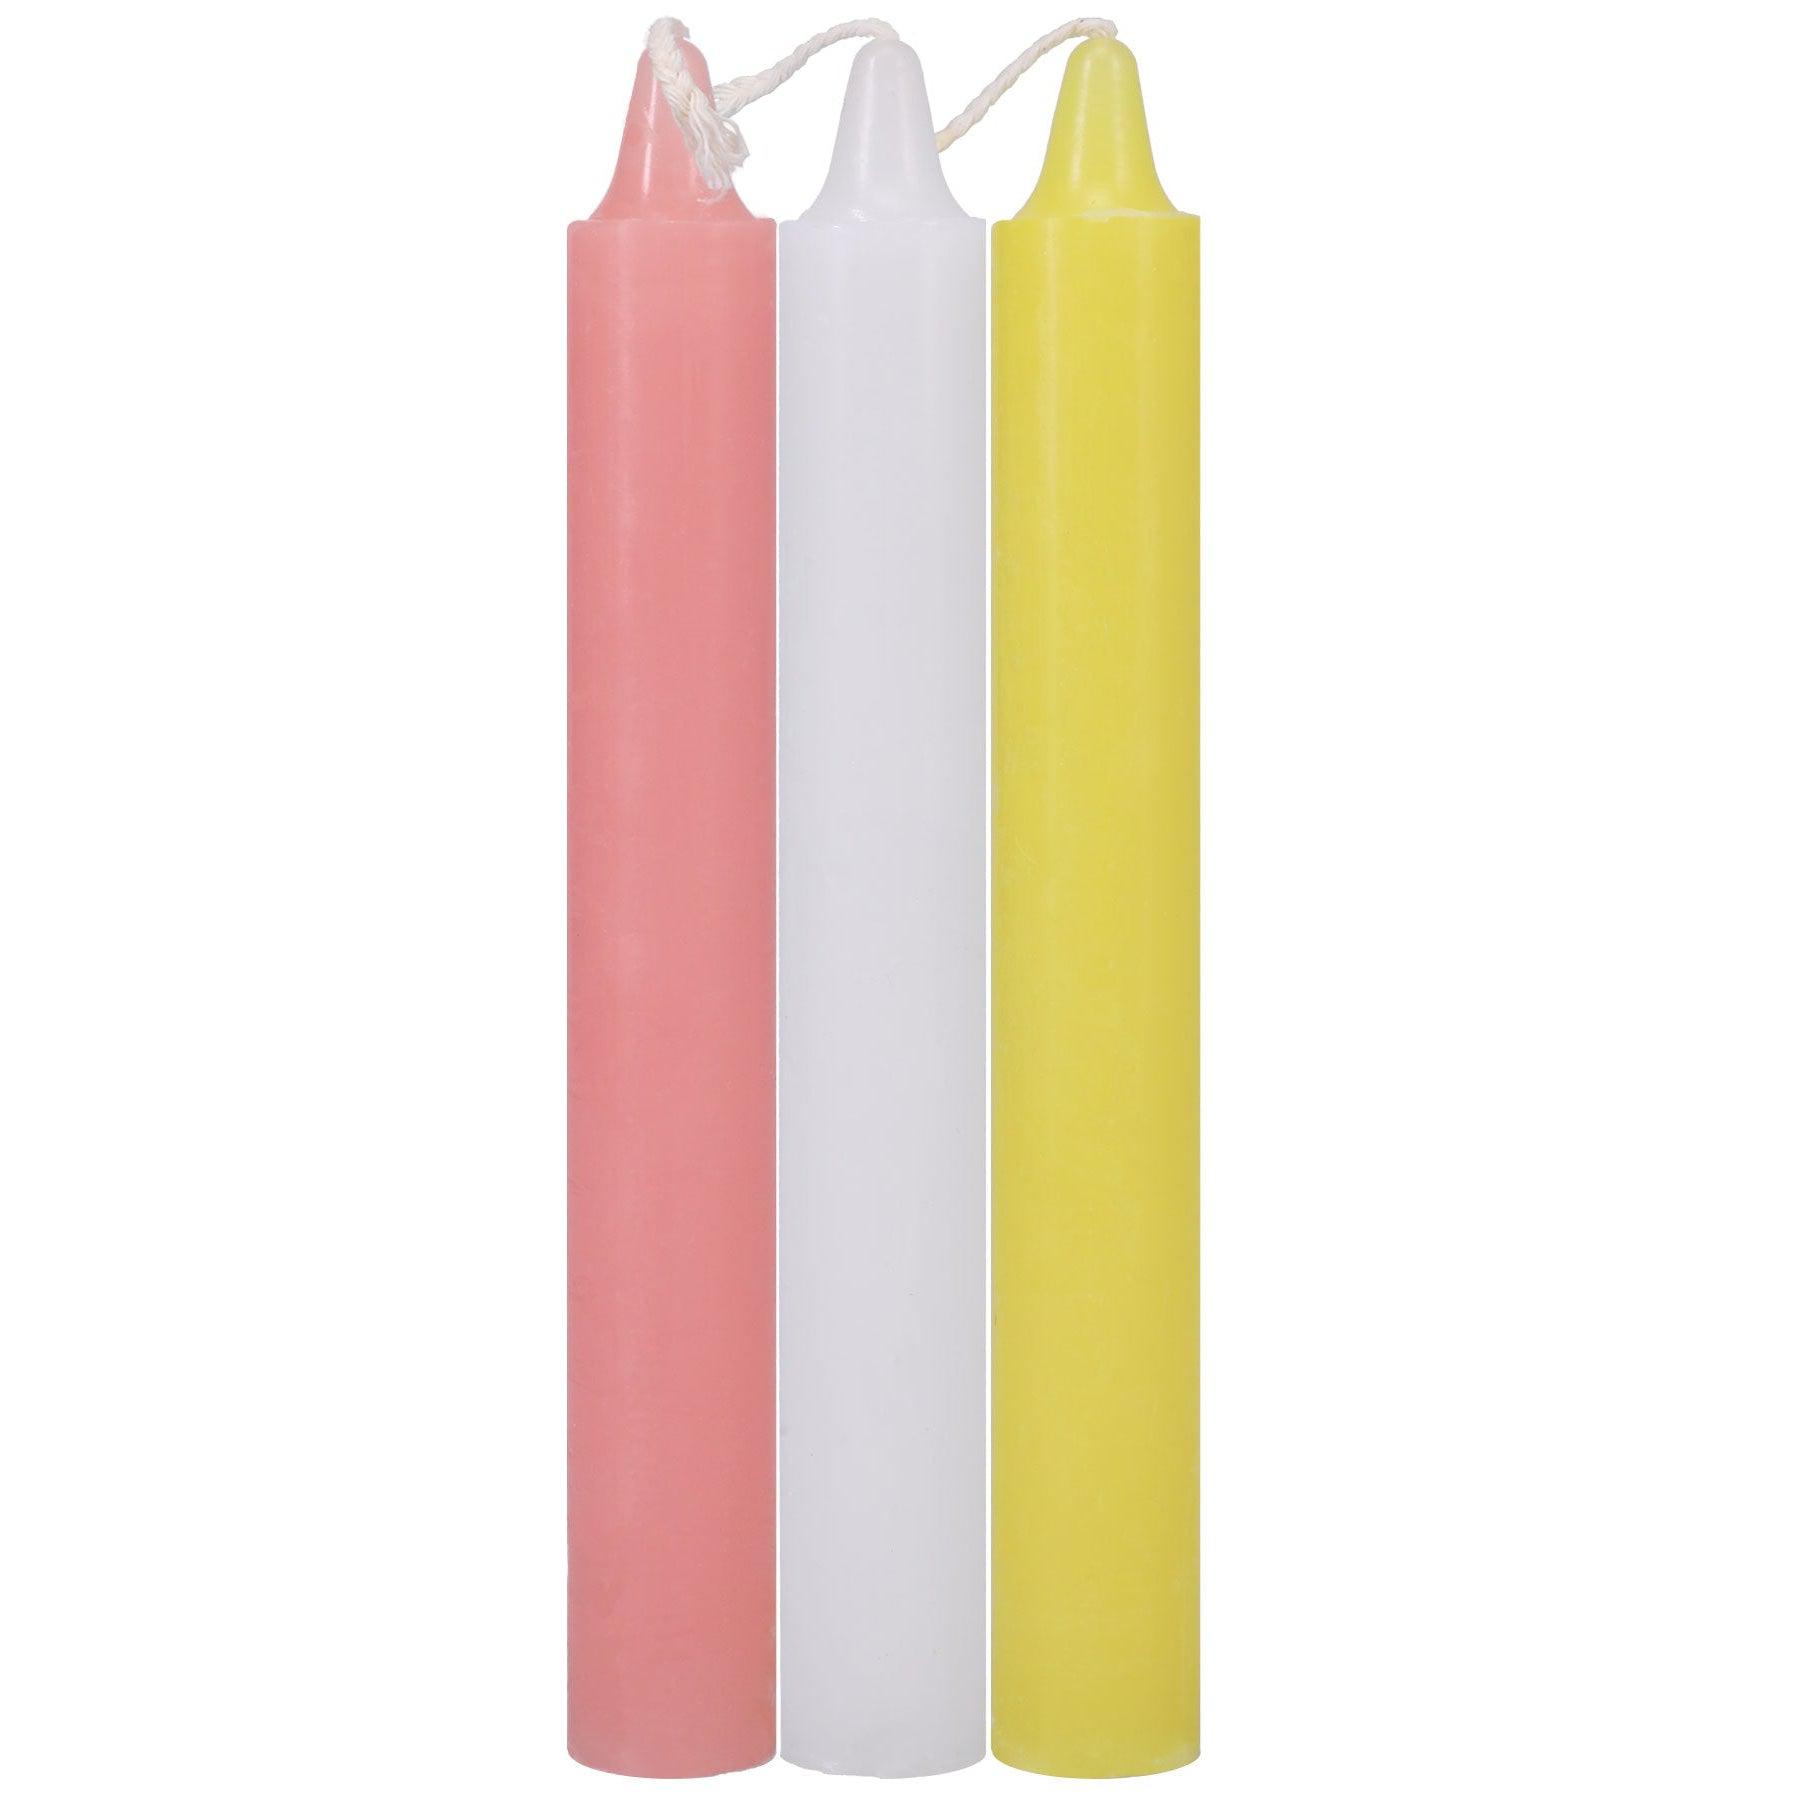 Japanese Drip Candles - 3 Pack - Pink, White, Yellow